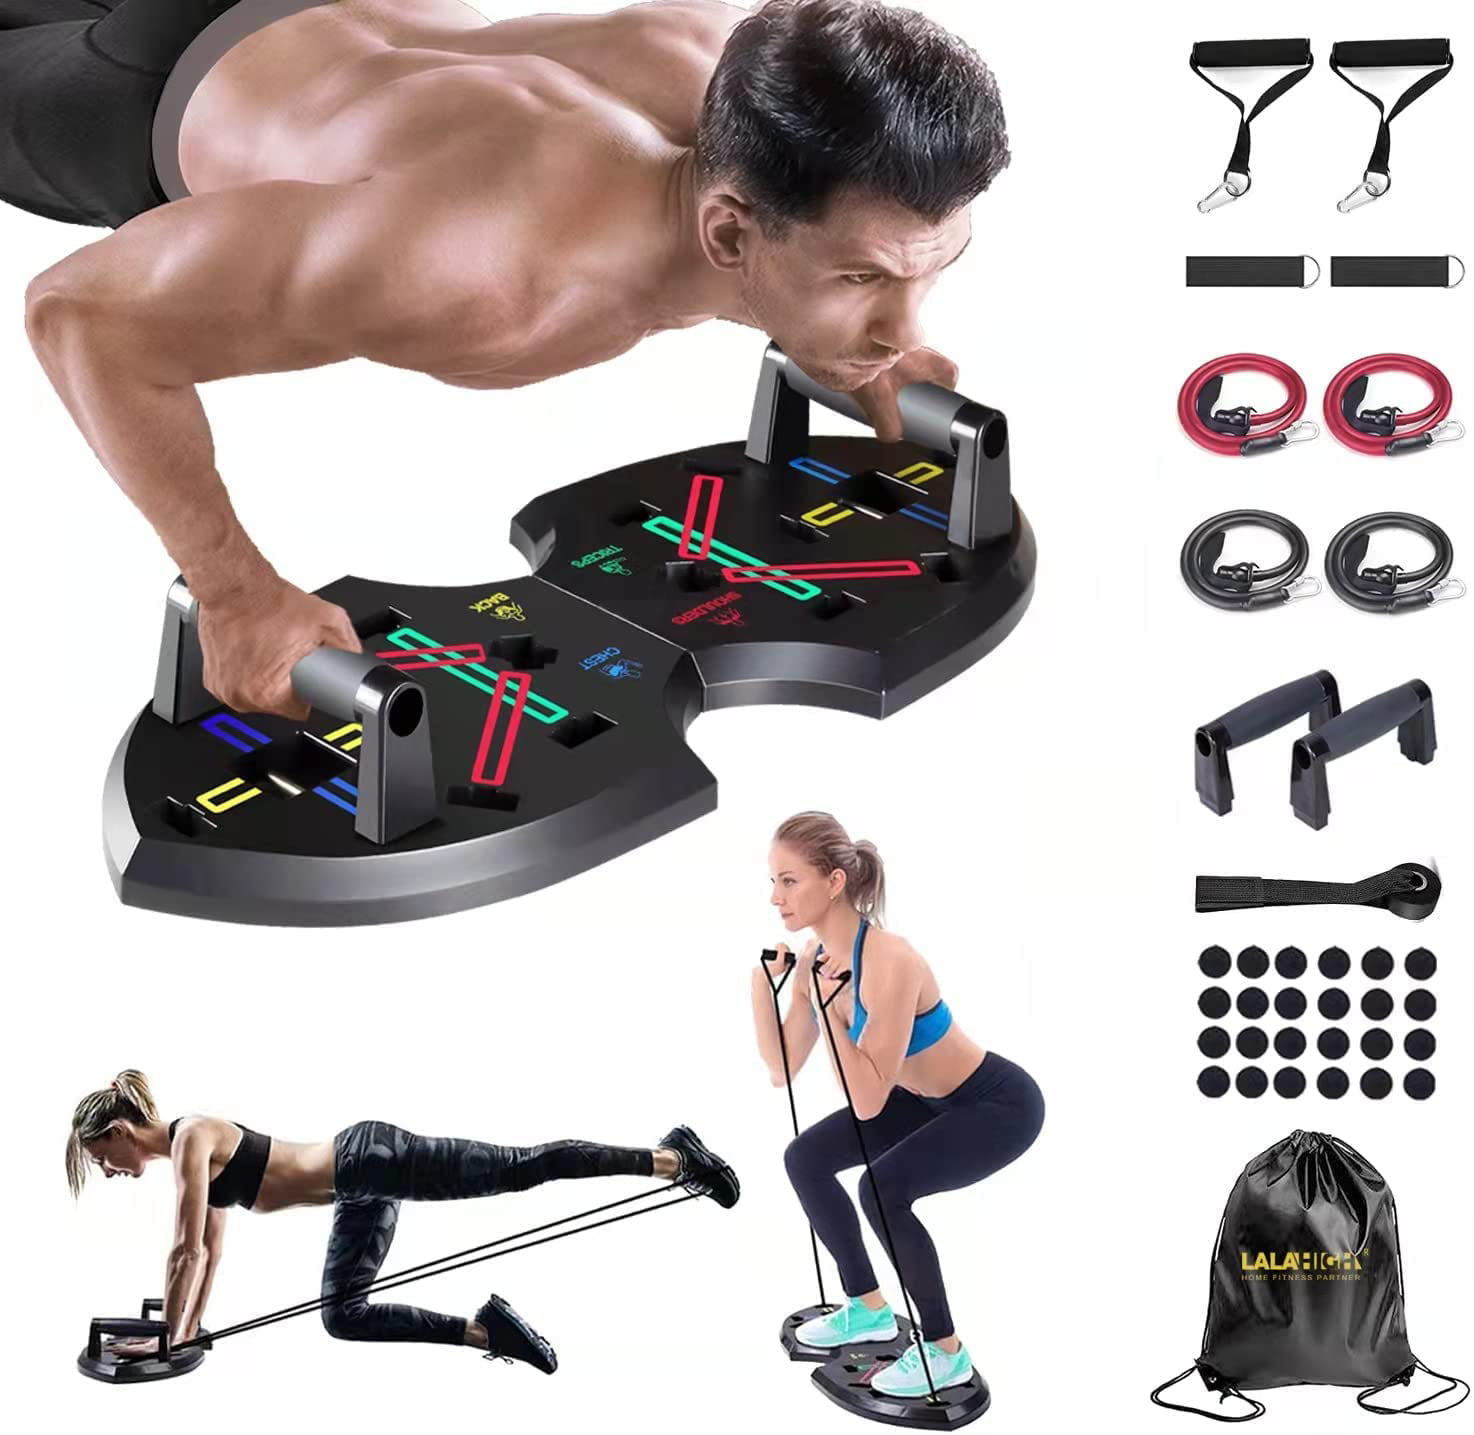 Push Up Rack Board Men Women 14 in 1 Multi-Functional Body Building Fitness Exercise Workout Push-up Stands for Home Fitness Training Foldable Updated Version 